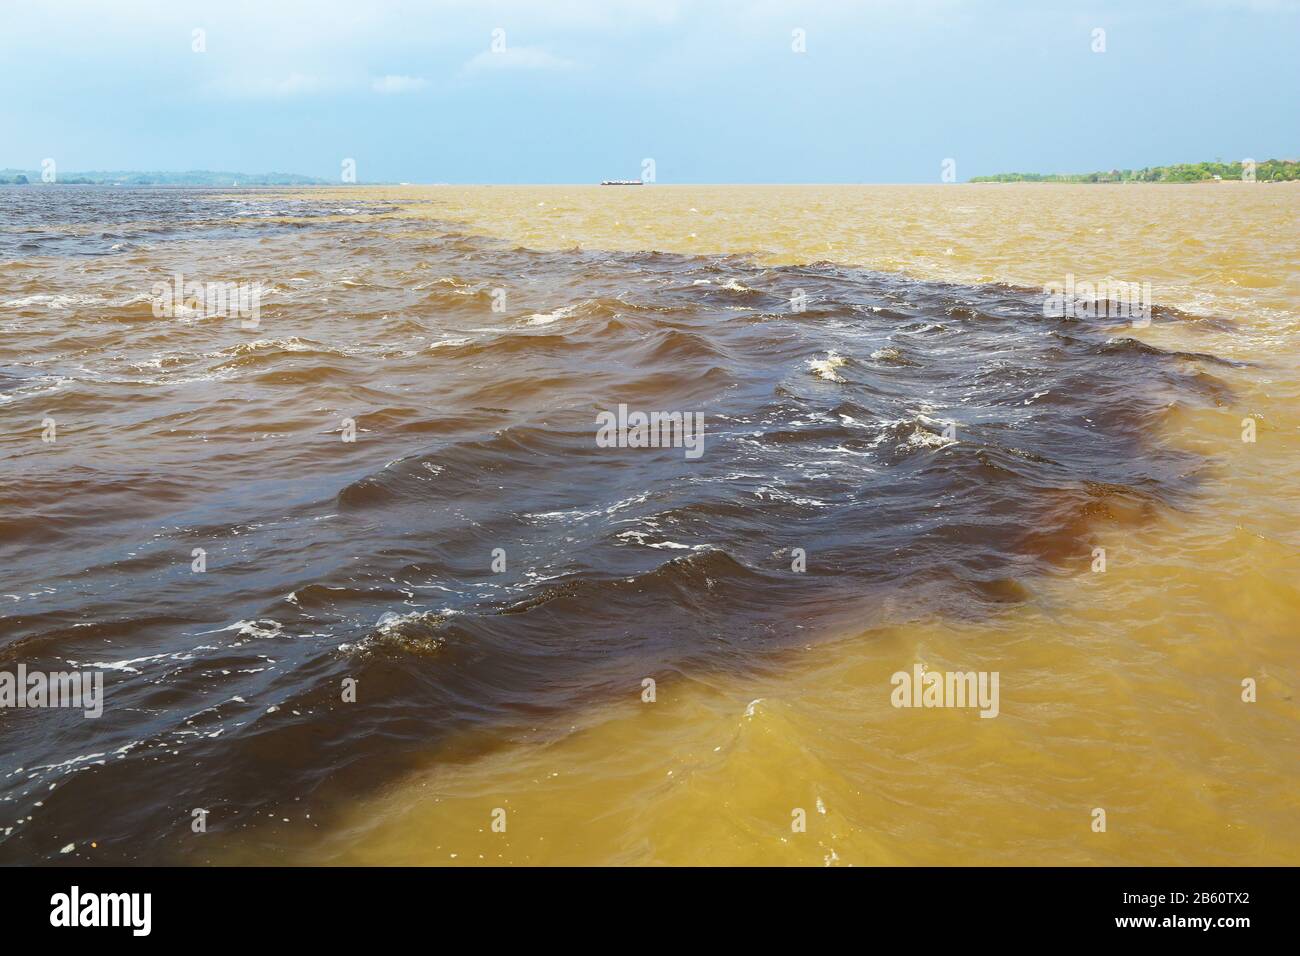 Amazon & Rio Negro waters.Close to Manaus there is the confluence between Rio Negro, a river with very dark water, and the sandy-colored Amazon river. Stock Photo